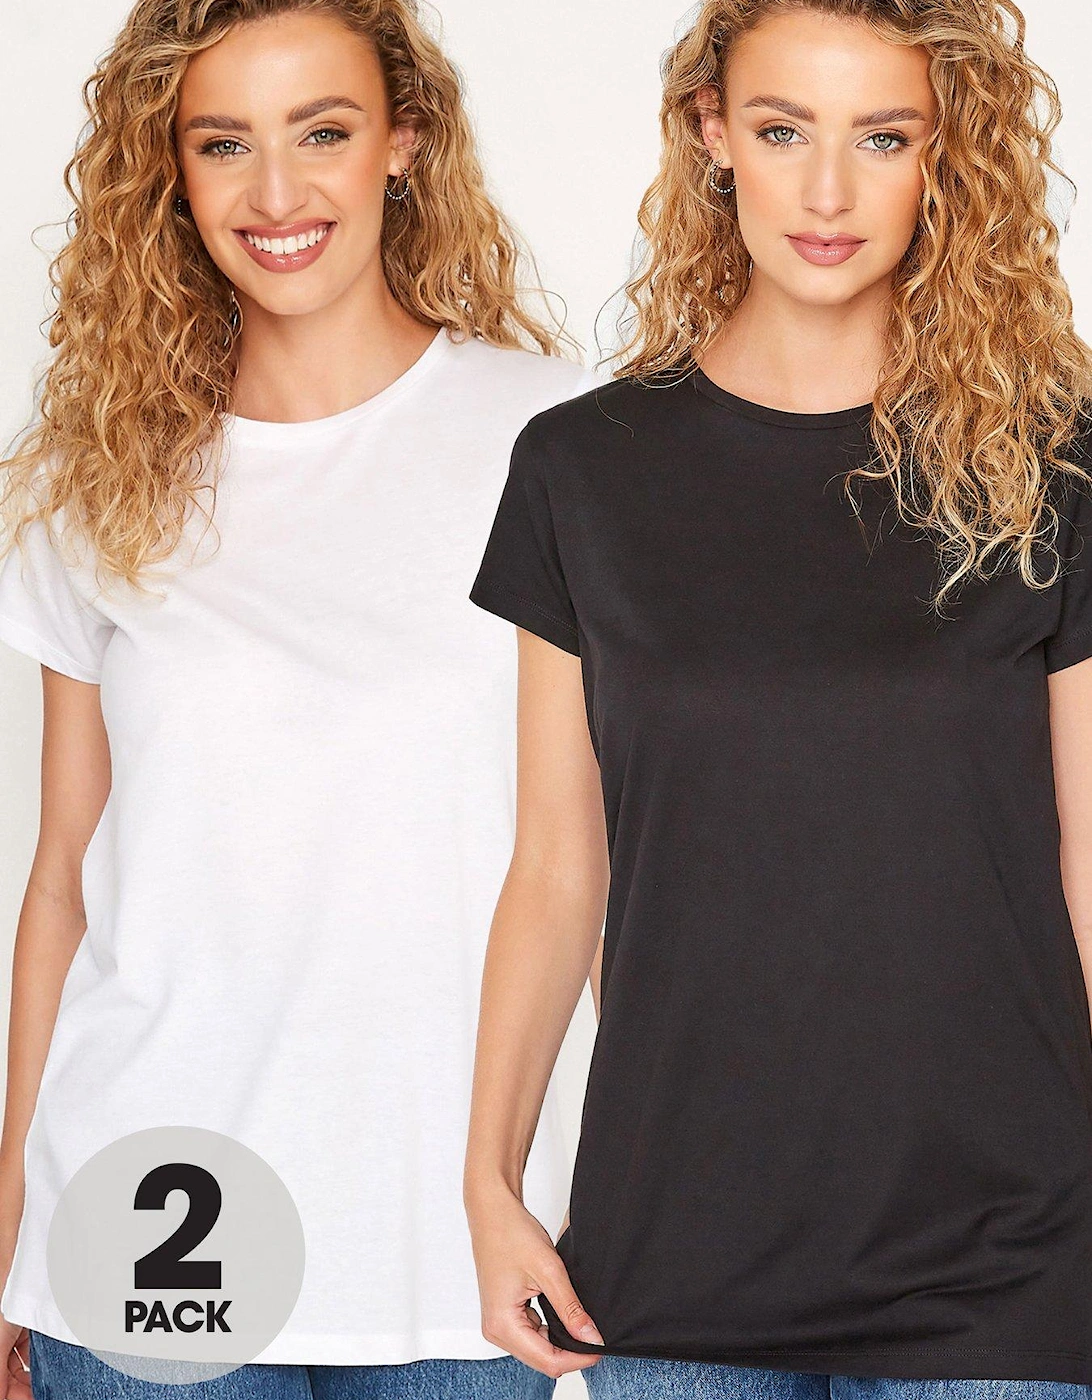 2 Pack Tee Black And White, 2 of 1